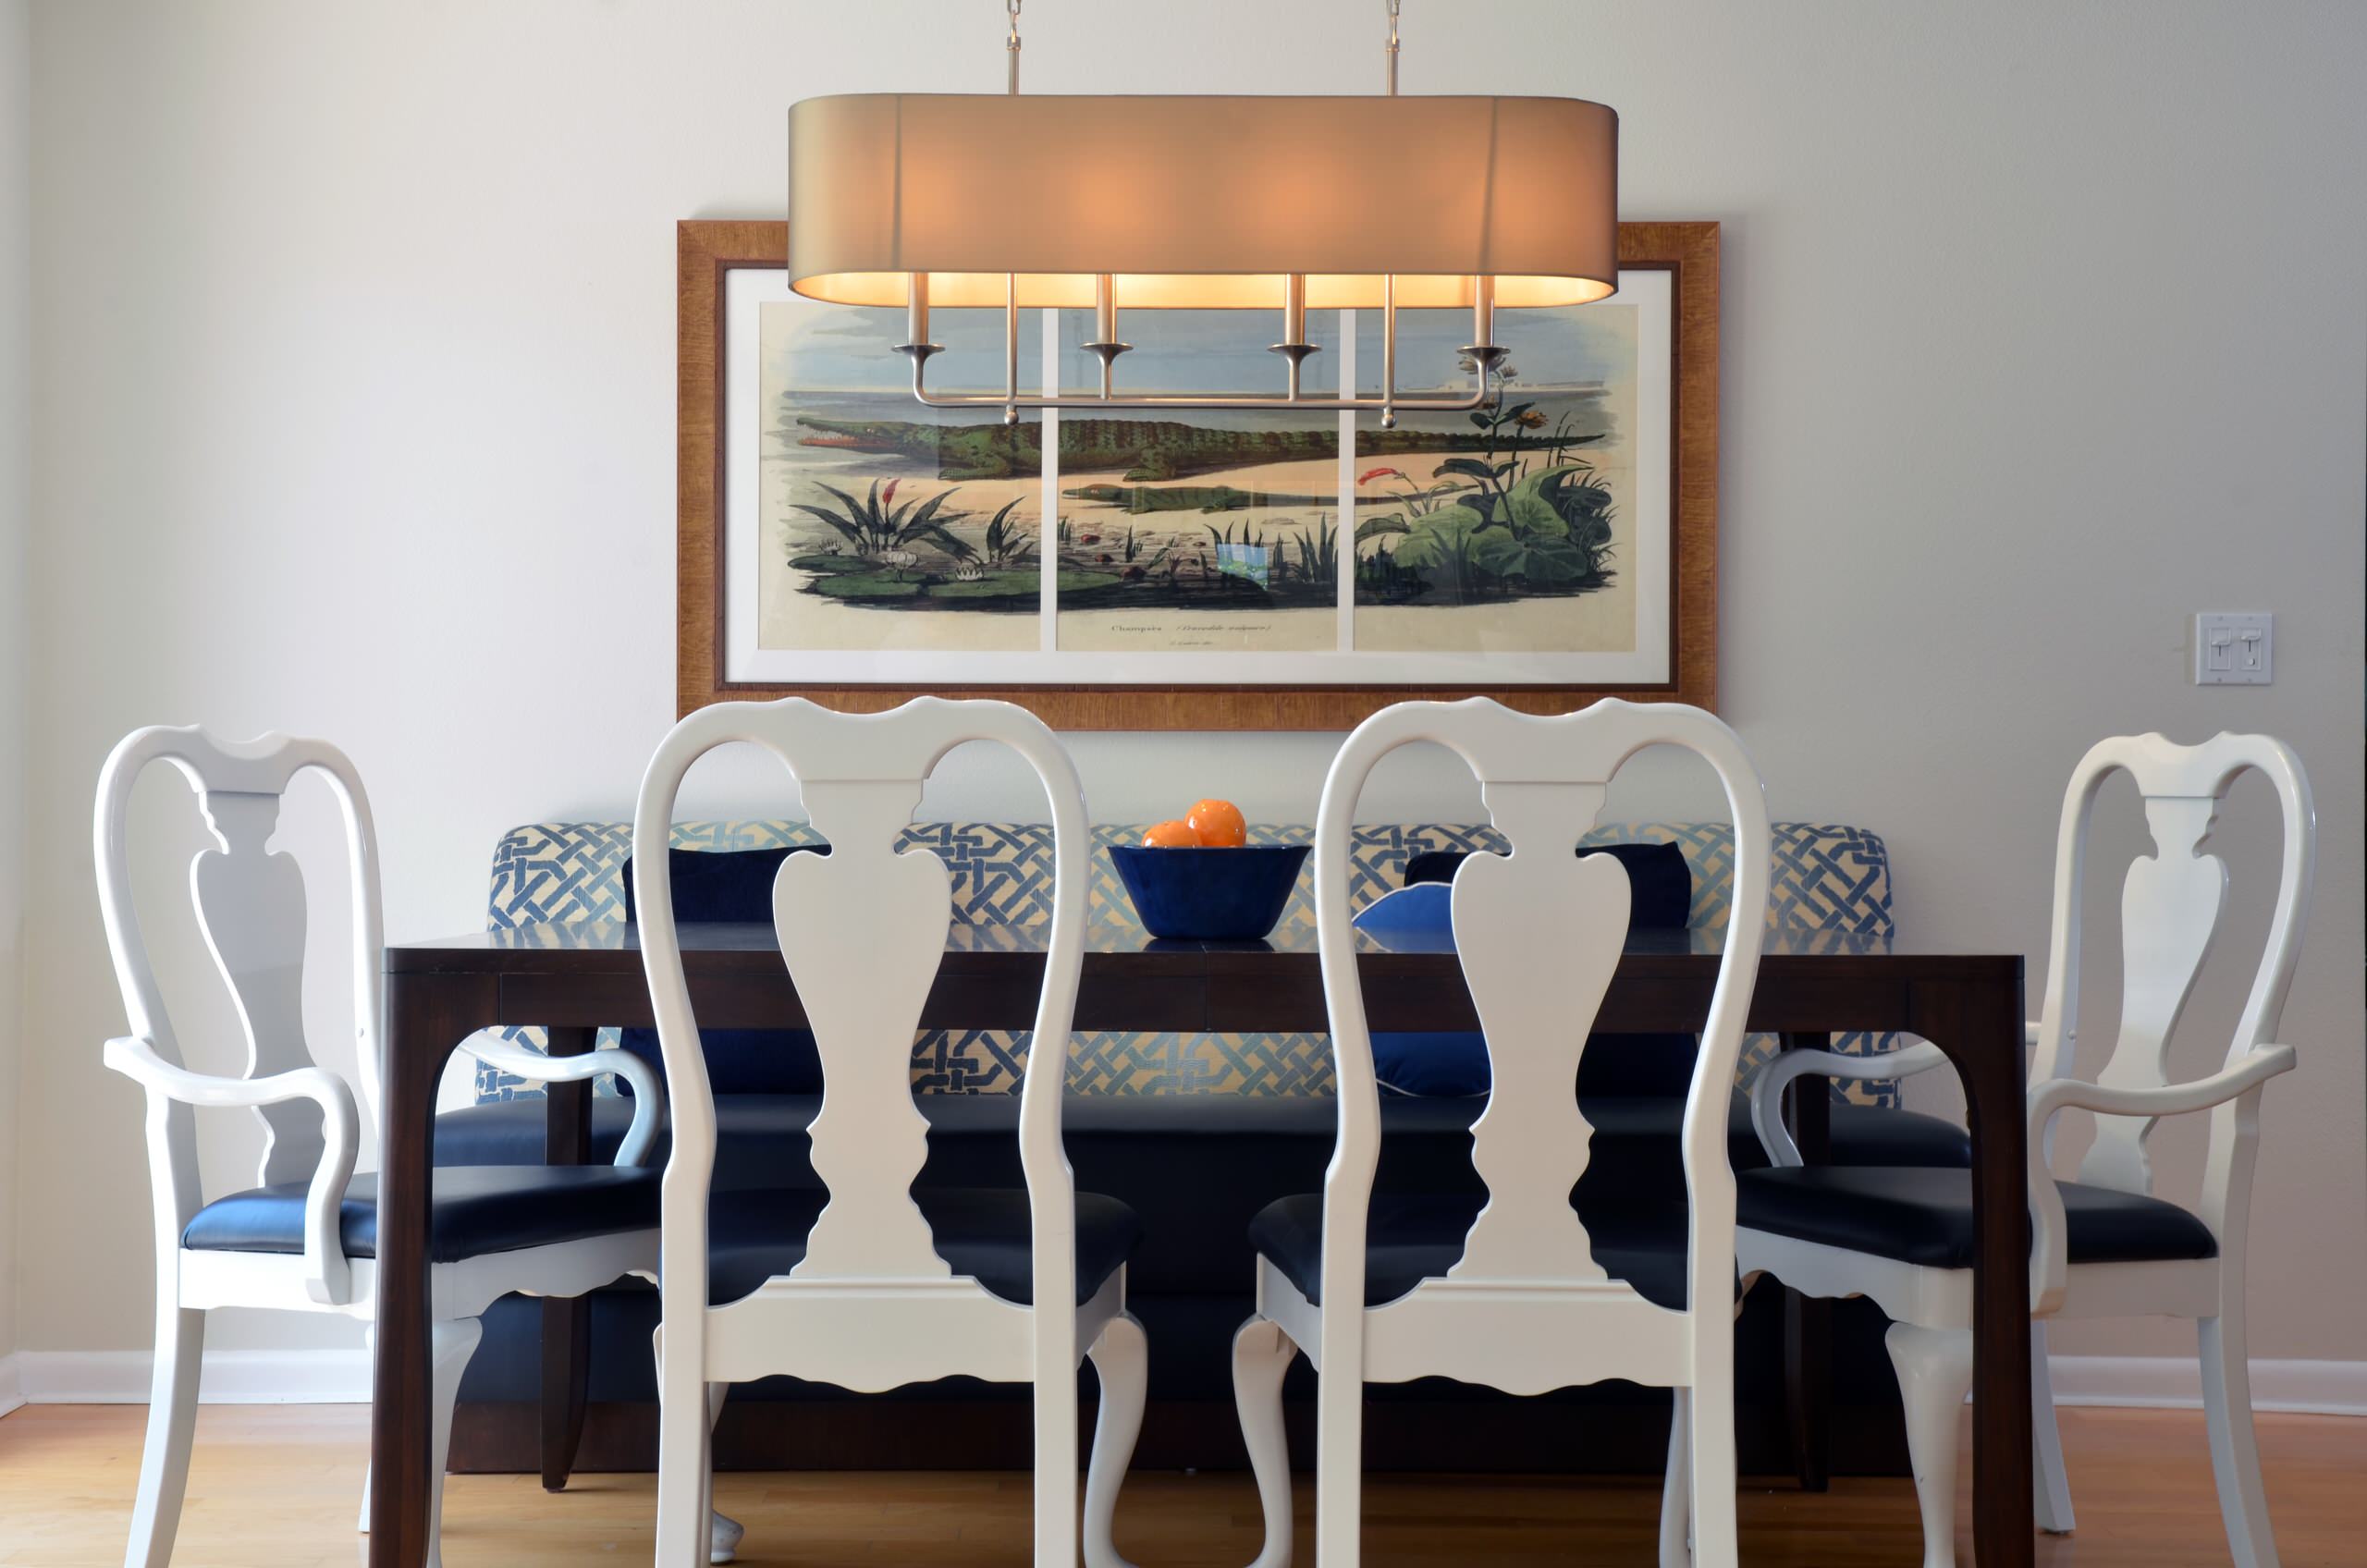 Queen Anne Dining Room Ideas Photos, Queen Anne Style Dining Room Setups